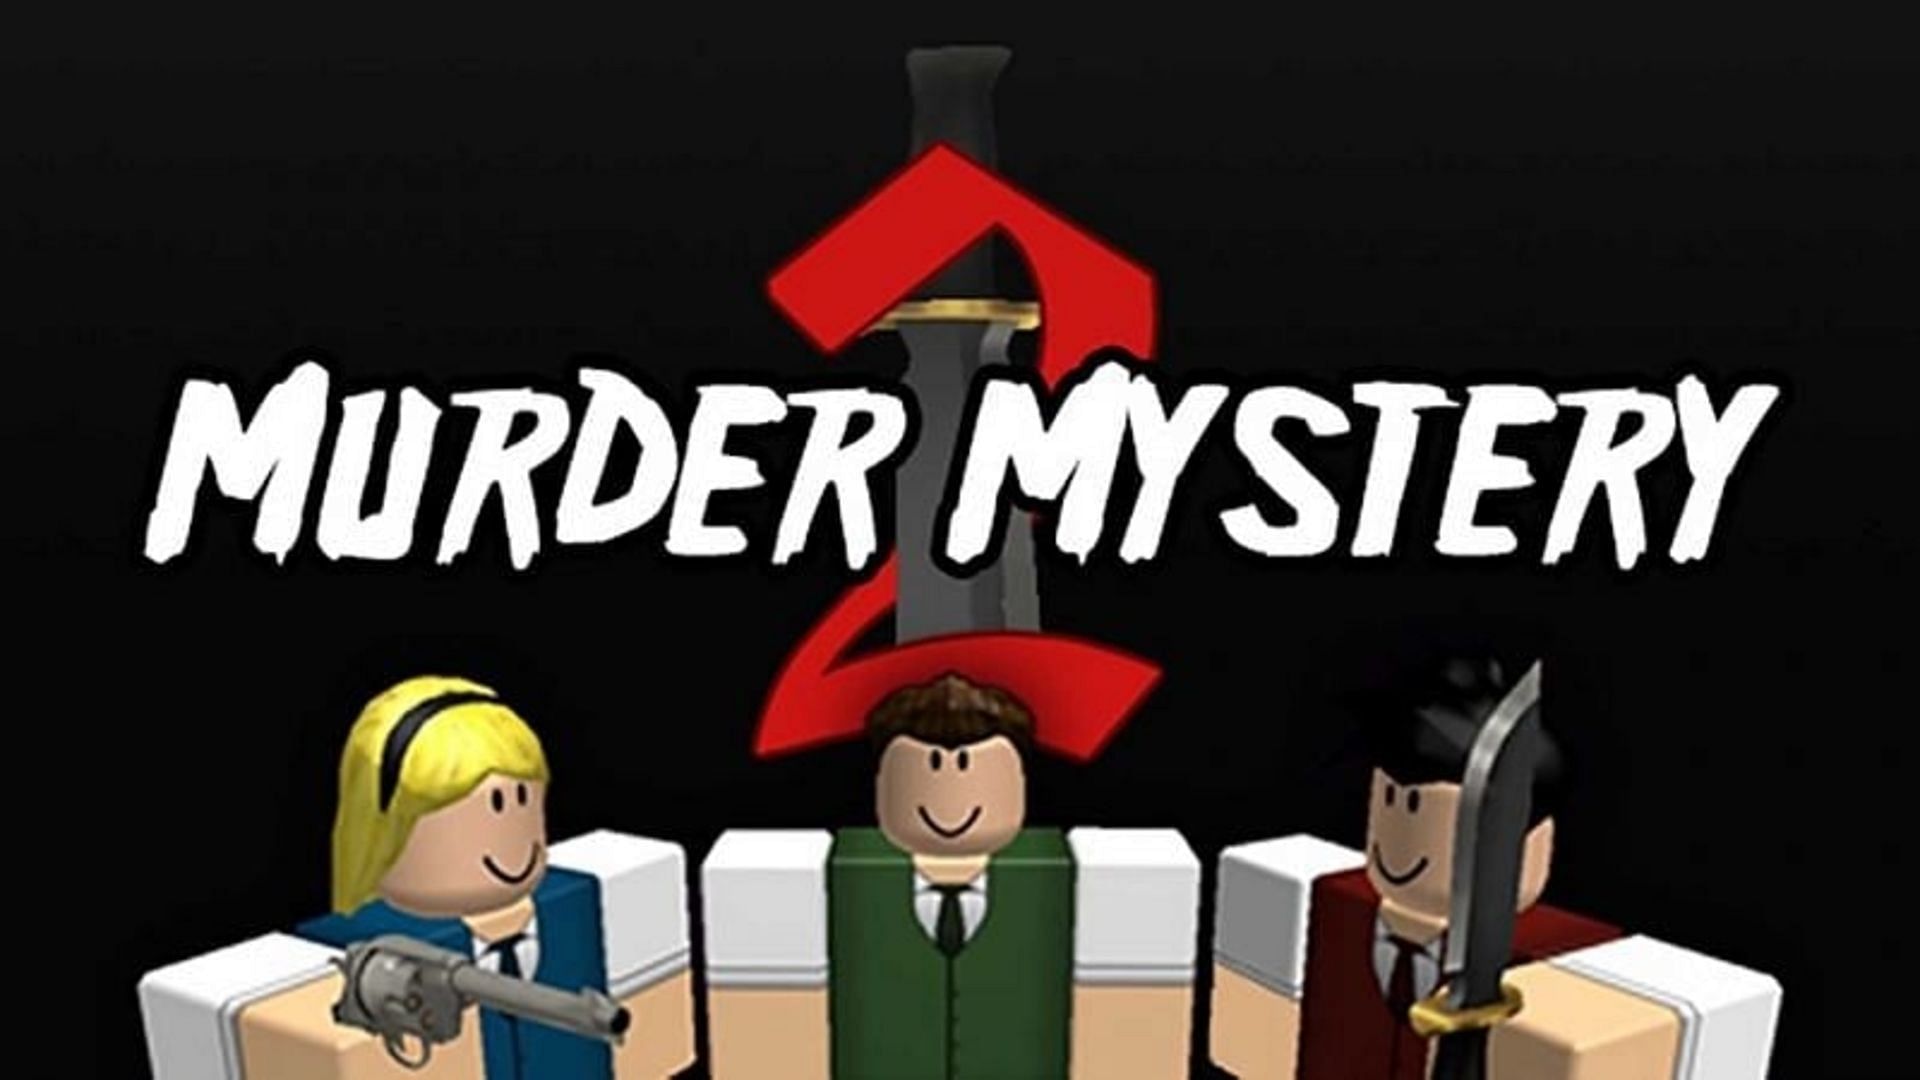 Roblox Murder Mystery 2 MM2 Super Rare Classics/Vintages *FAST DELIVERY*